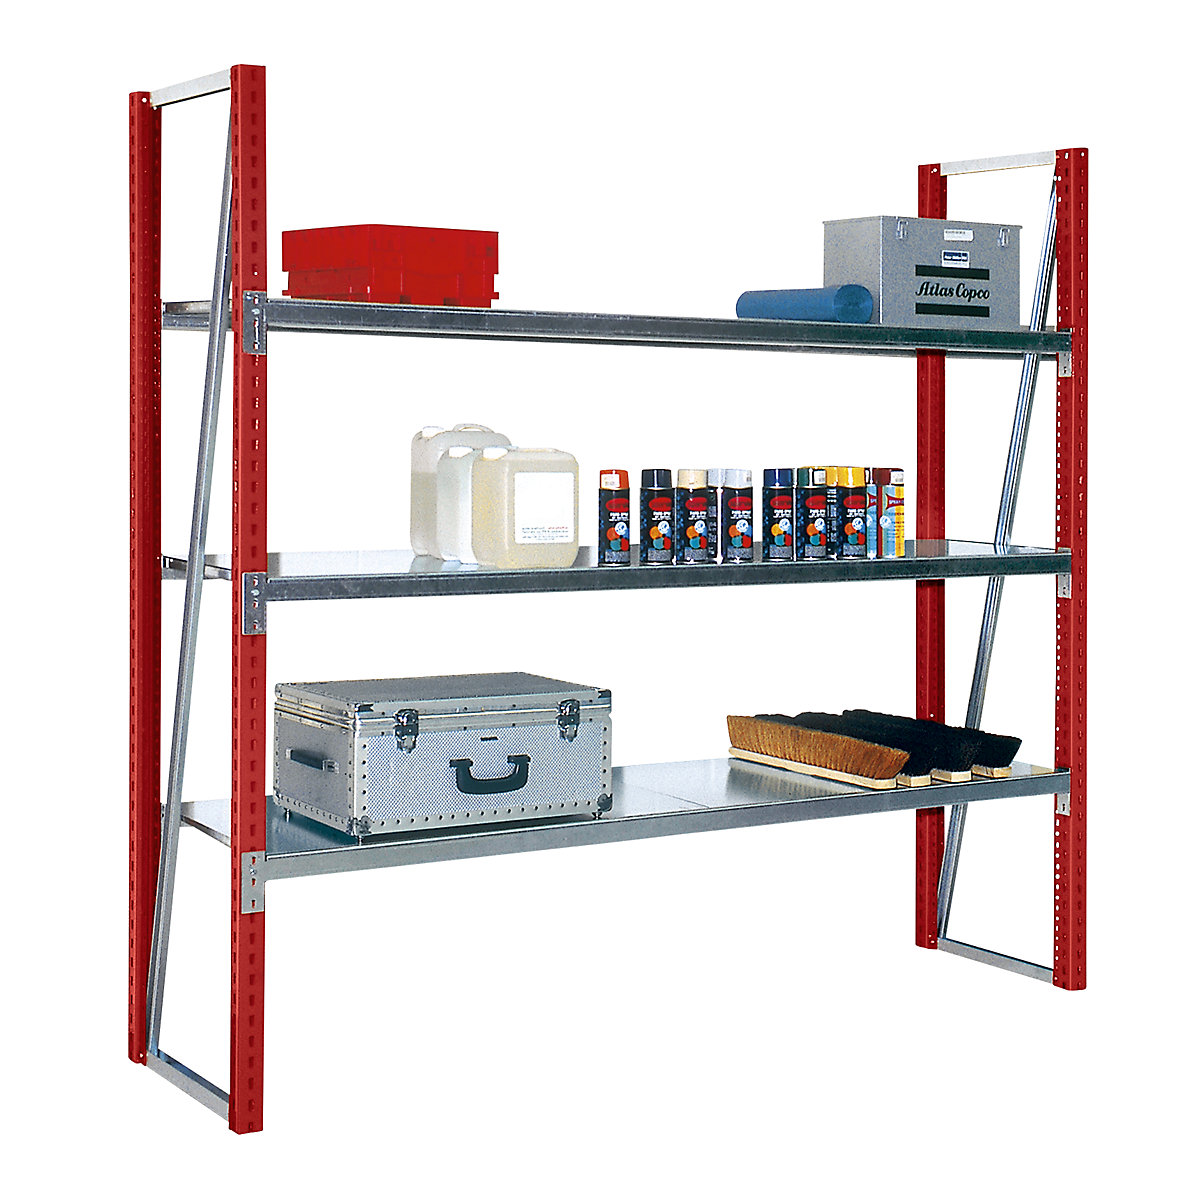 Wide span shelving, coloured – eurokraft pro, HxD 1990 x 500 mm, extension shelf unit, flame red RAL 3000